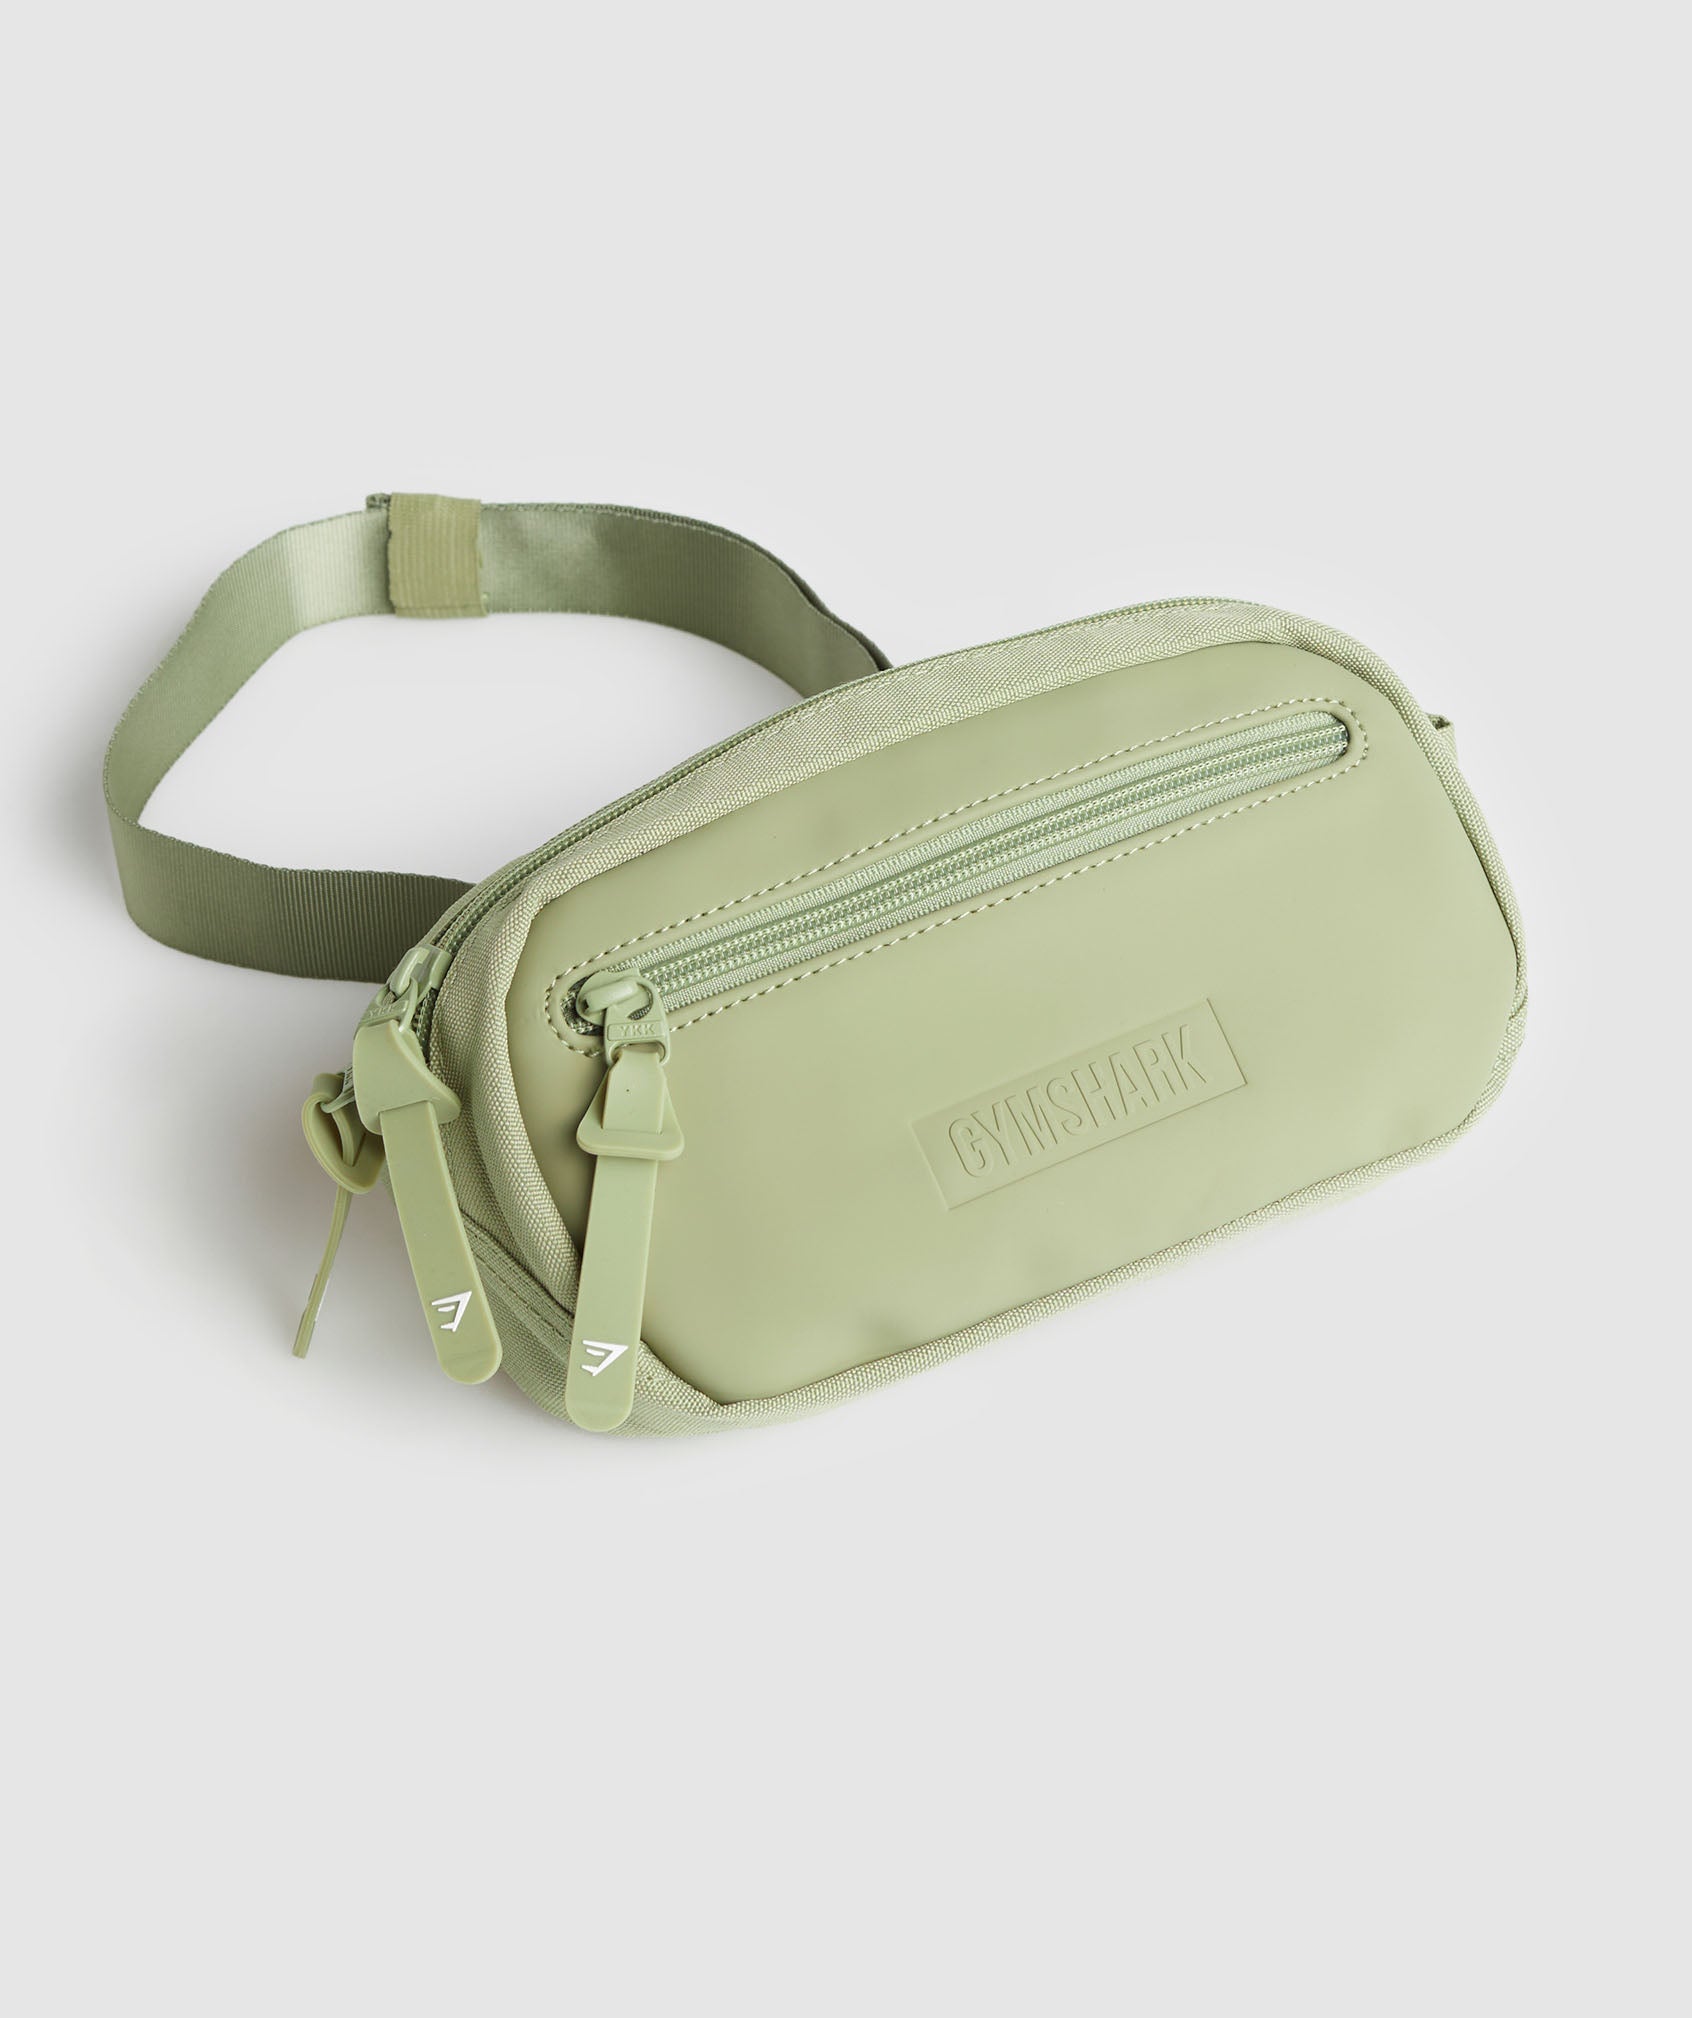 Everyday Waist Pack in Natural Sage Green - view 2